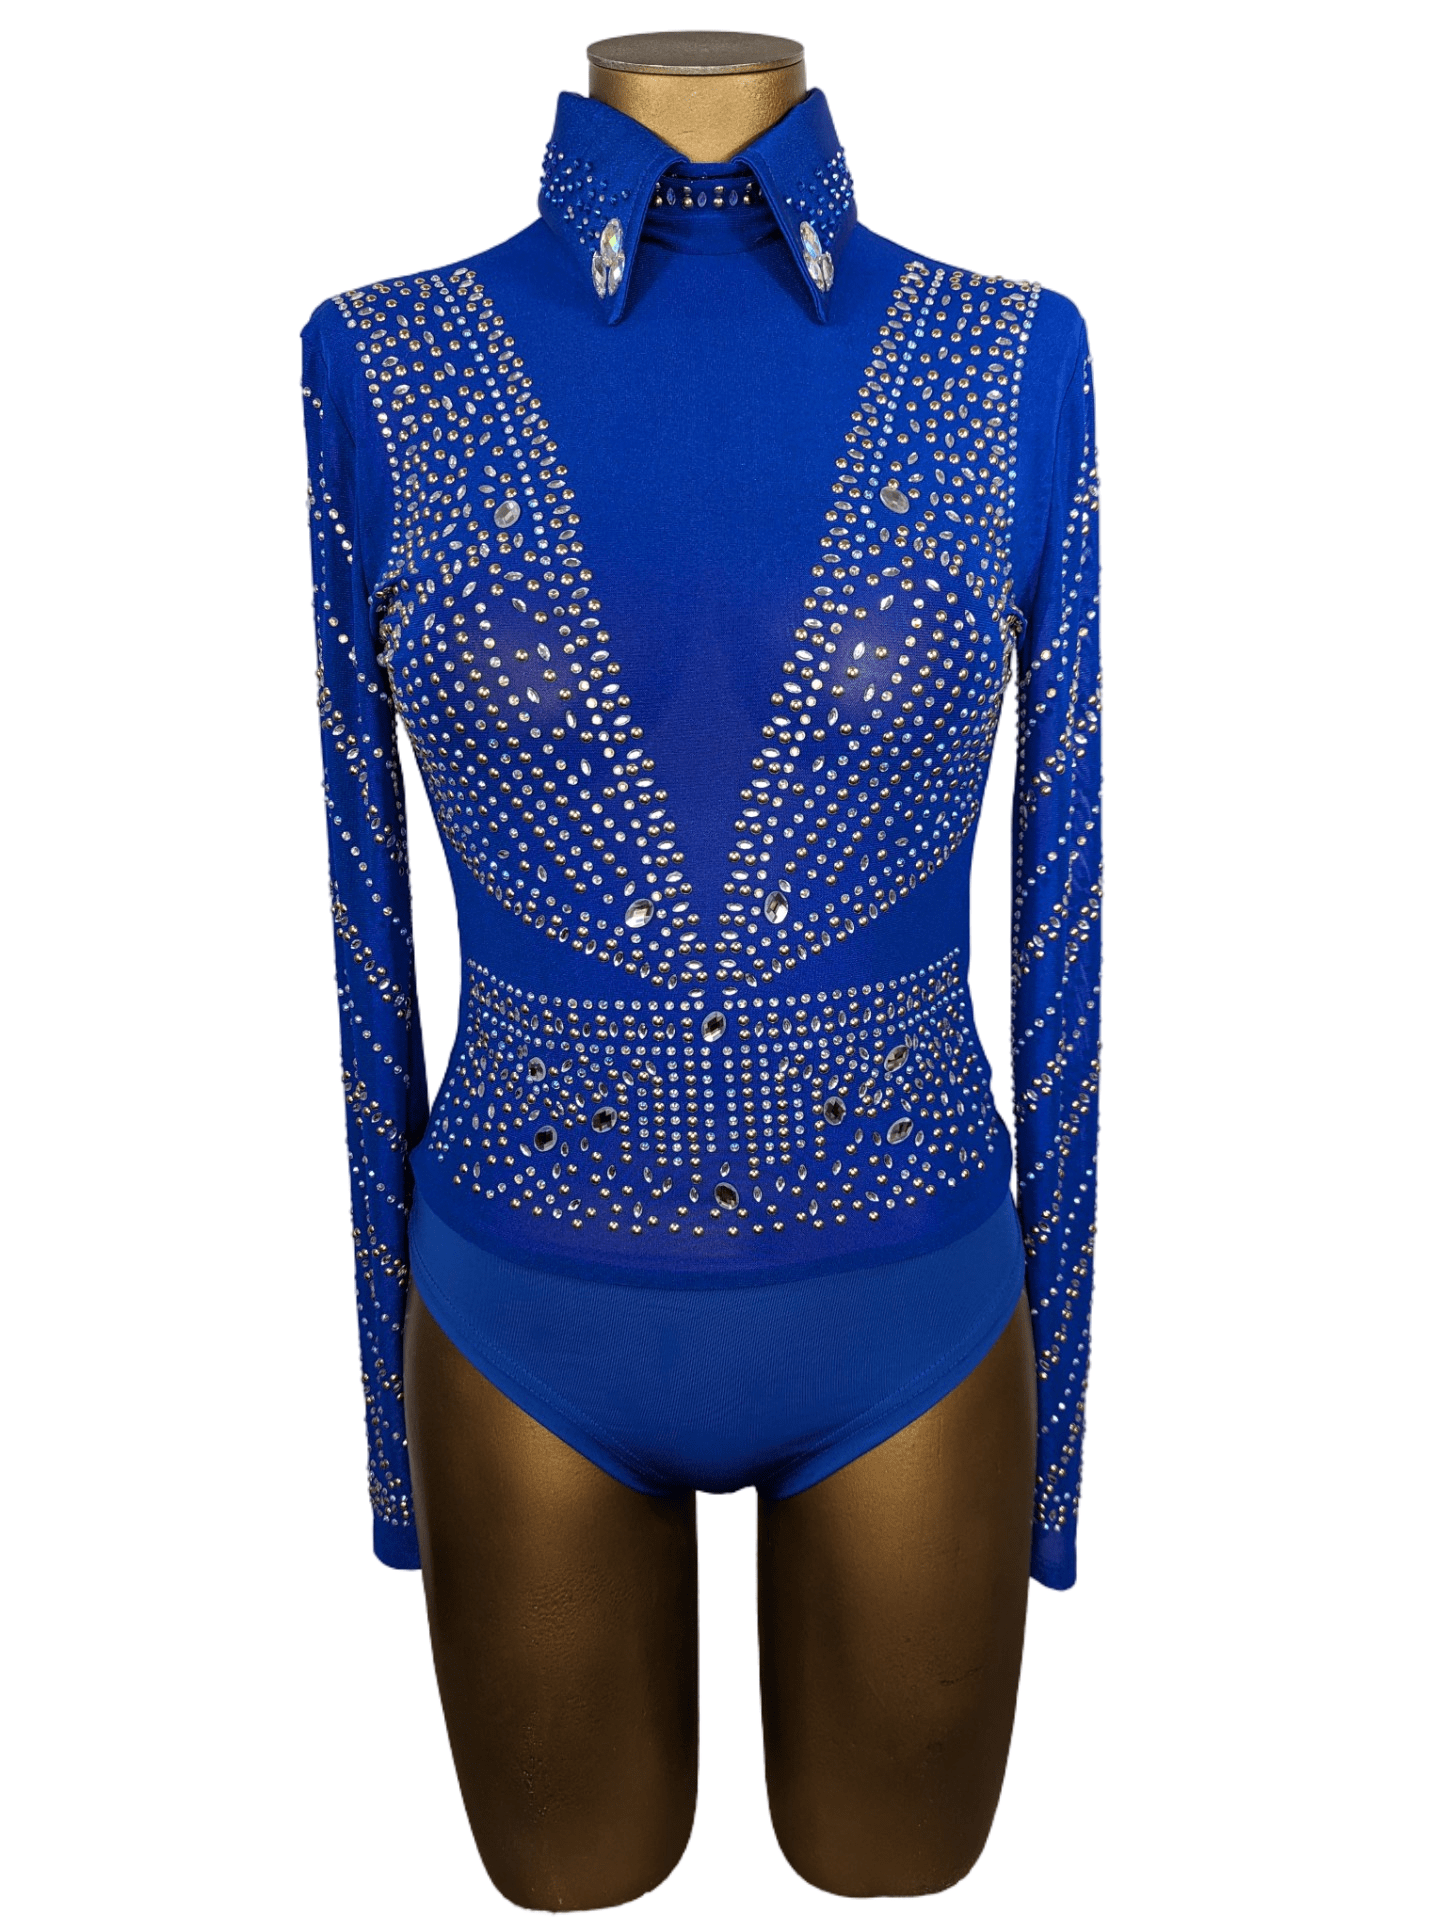 sparkle-ridge-womens-western-wear-affordable-show-clothes-horse-shirts-with-bling-rodeo-bodysuit-royal-blue-deep-v-studdess-front.png